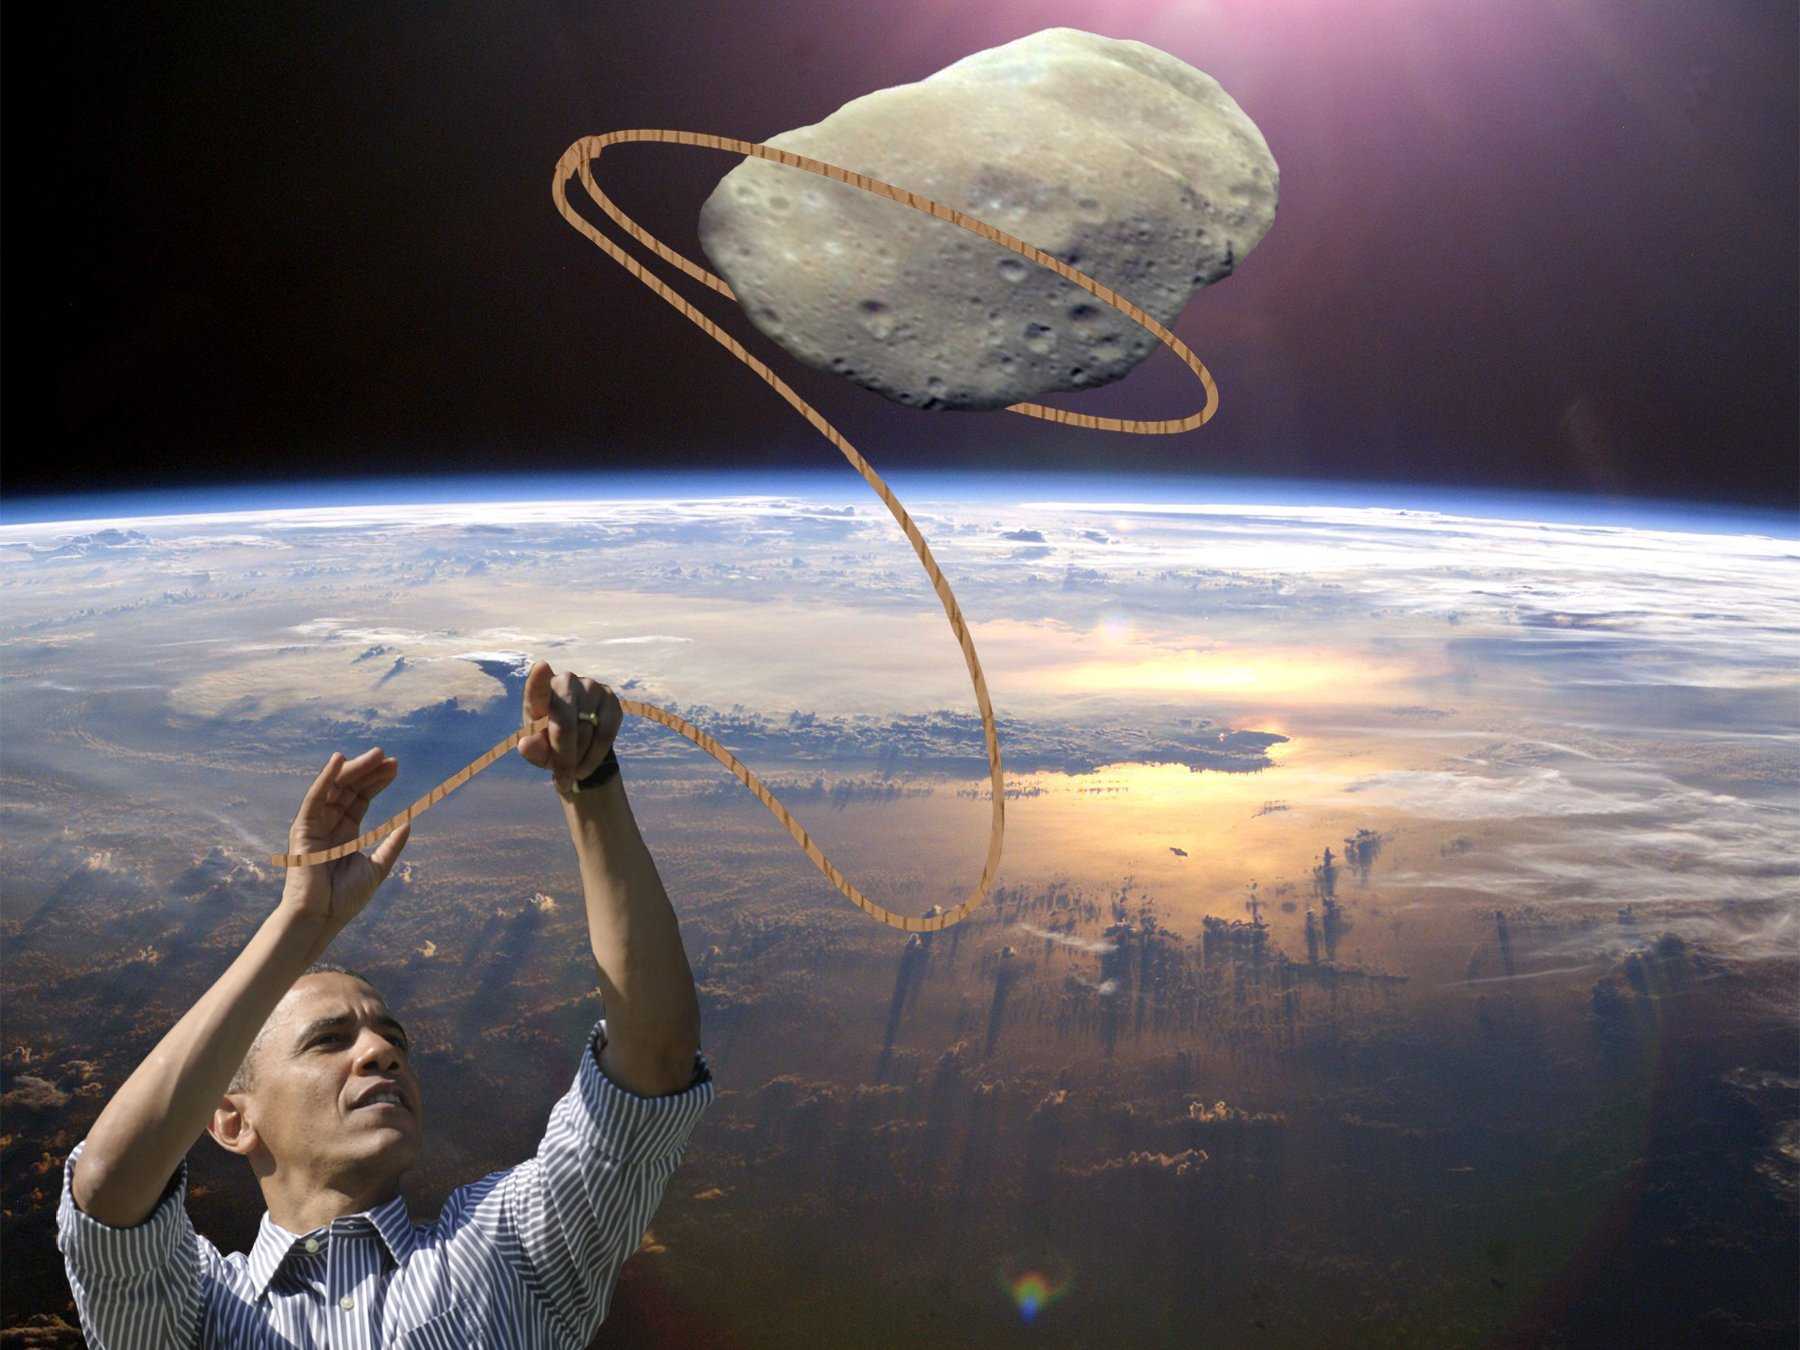 Plans to capture an asteroid (maybe not with a rope though!). Image from: http://www.businessinsider.com/nasas-100-million-asteroid-initiative-2013-4?op=1